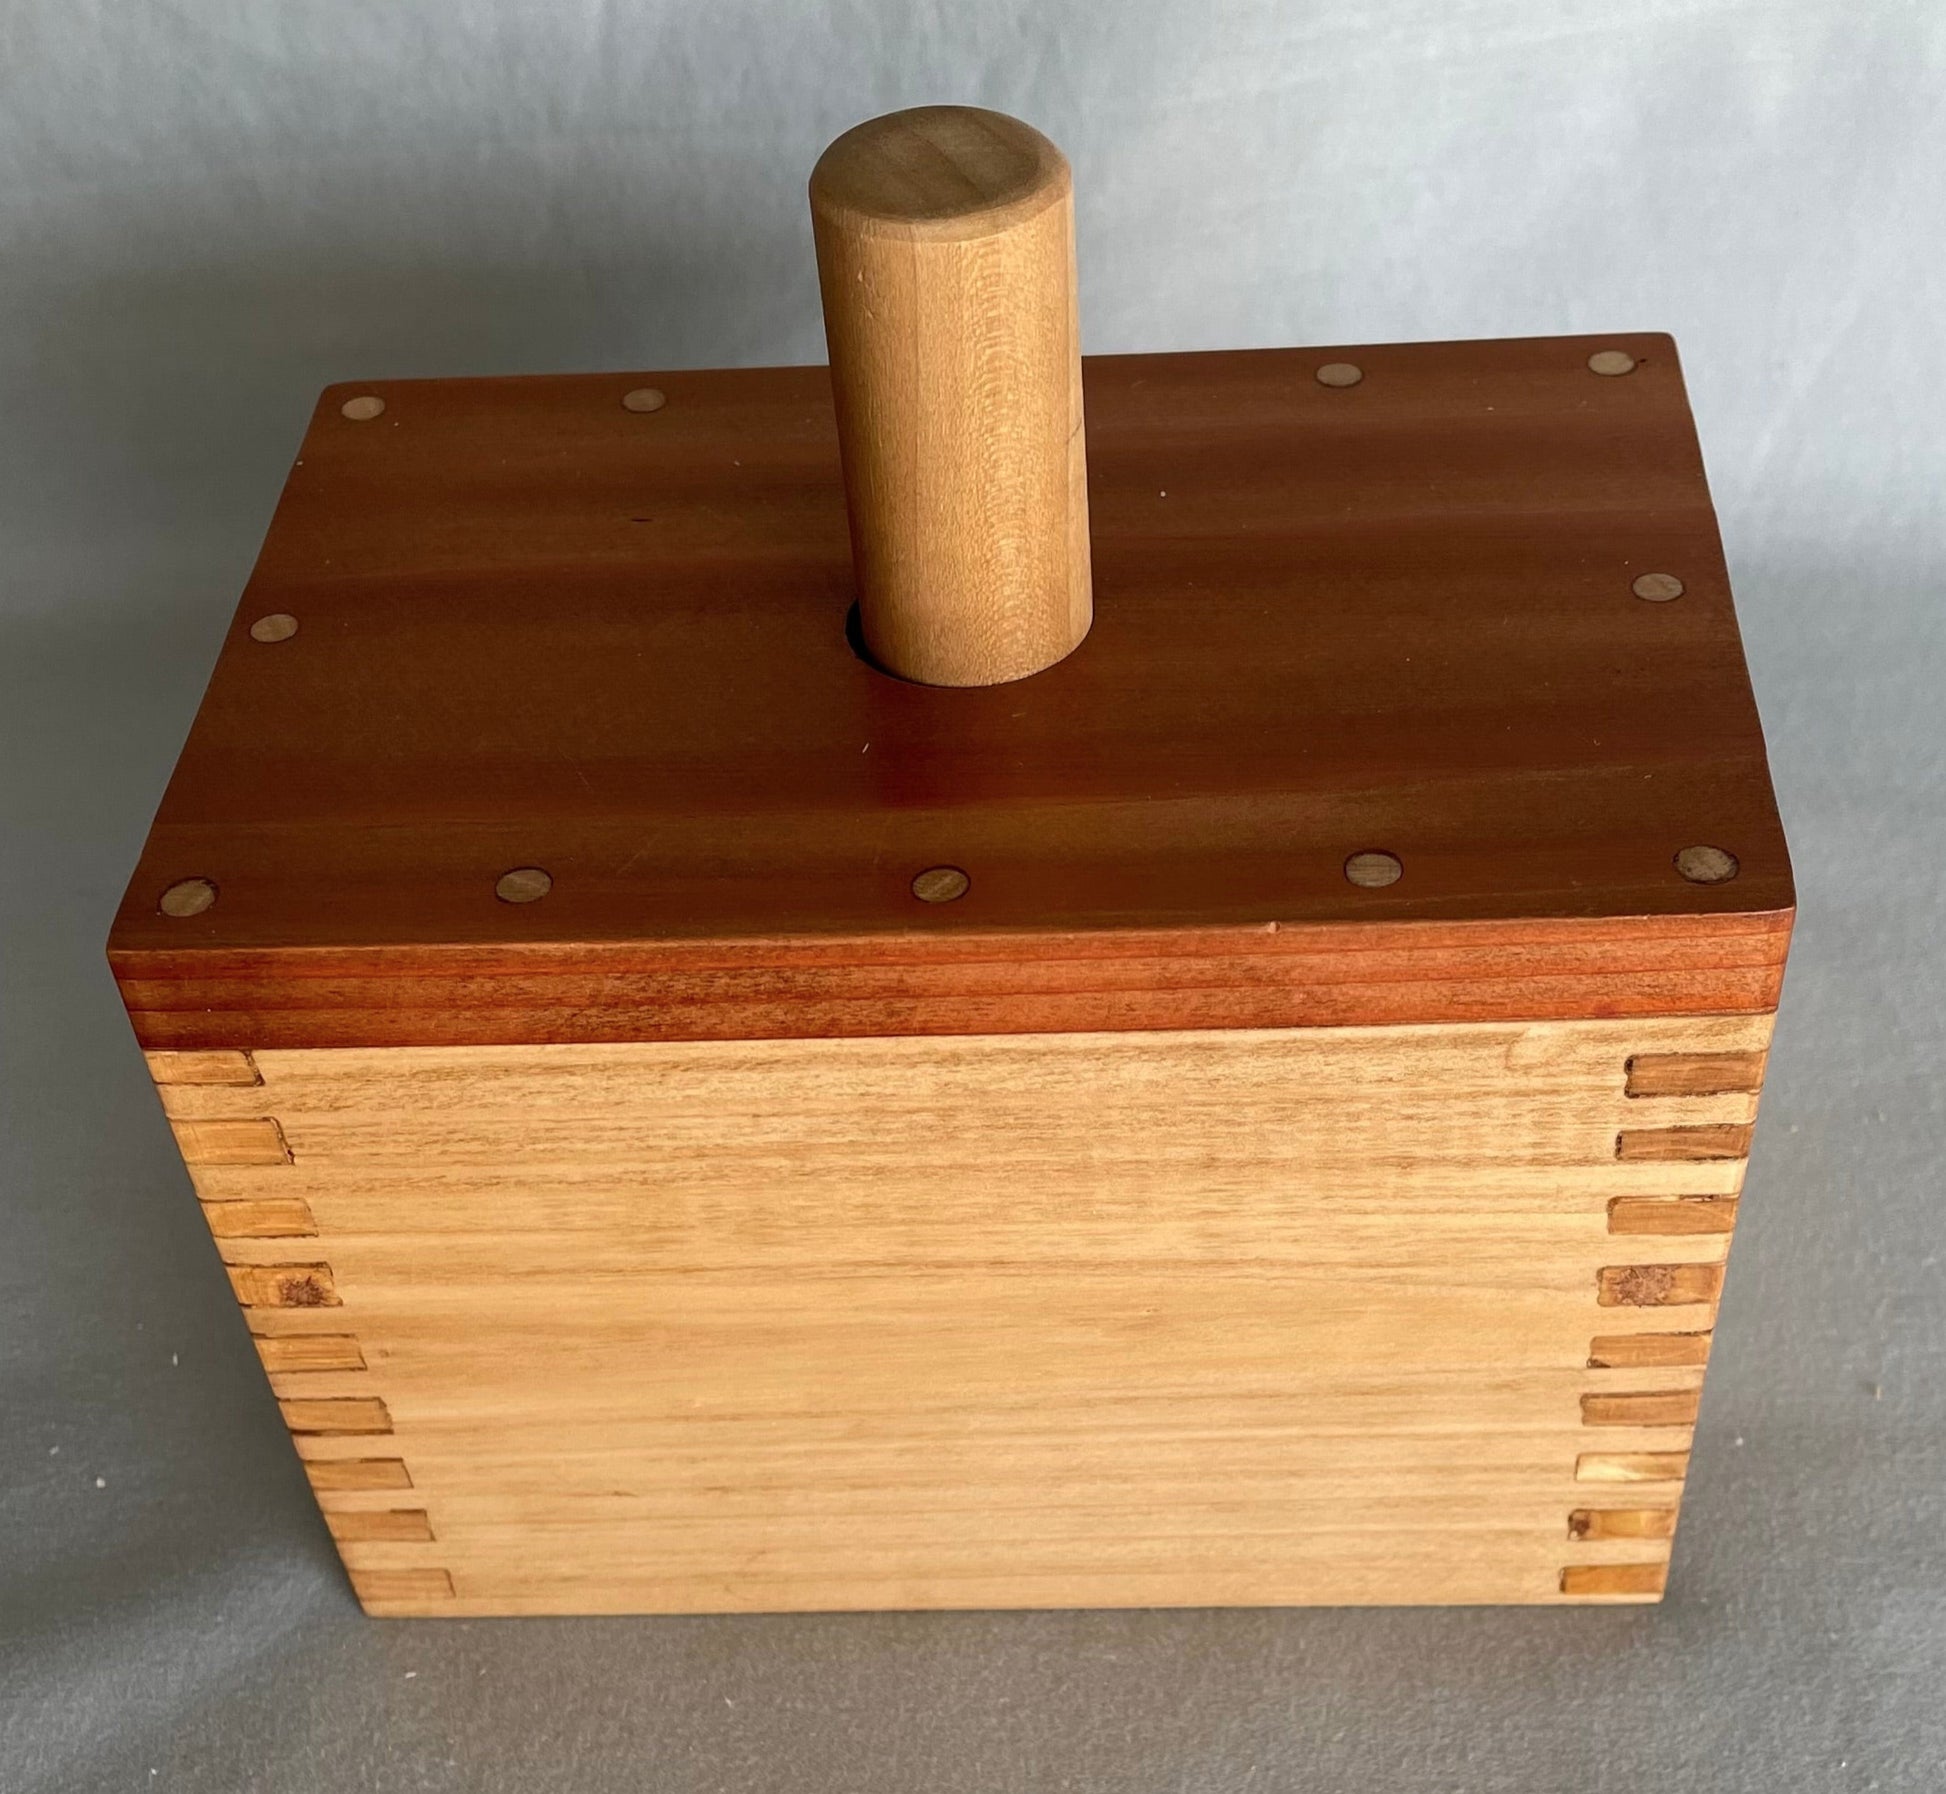 cedar top with dove tailed pine box and a pine paddle. Butter mold